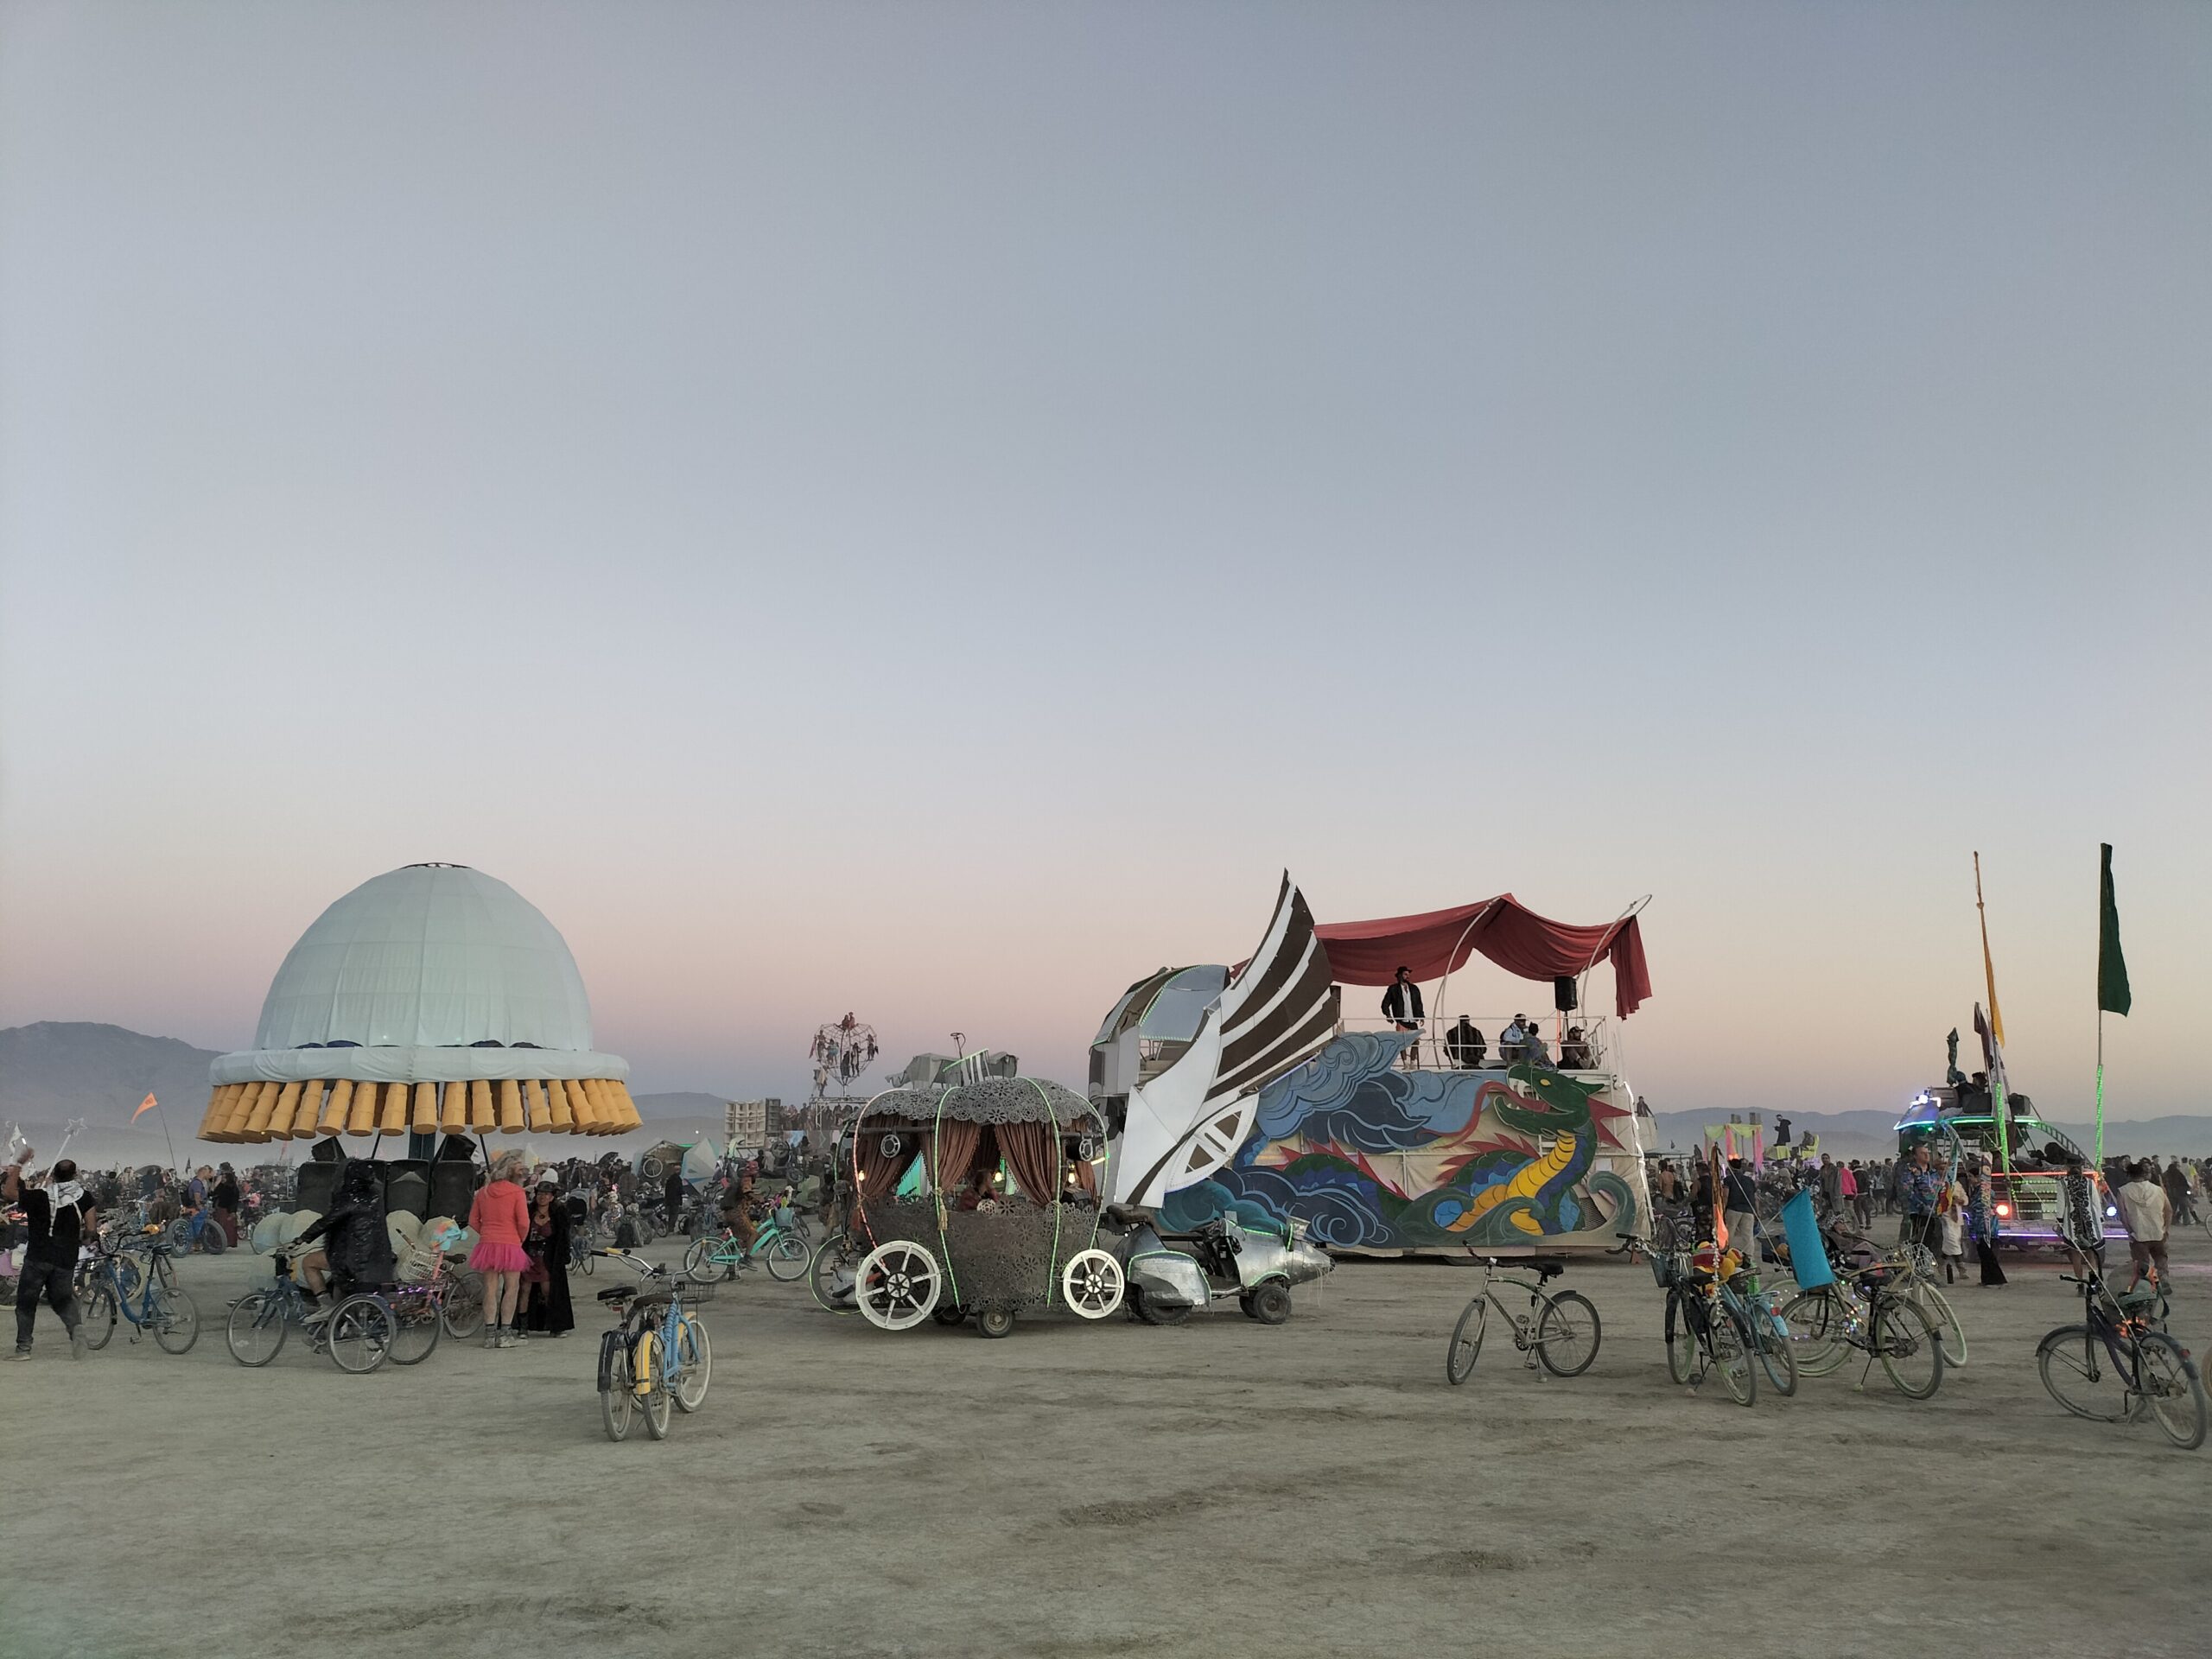 Art Cars and bikes scatter the desert with a fading clear blue sky in the background